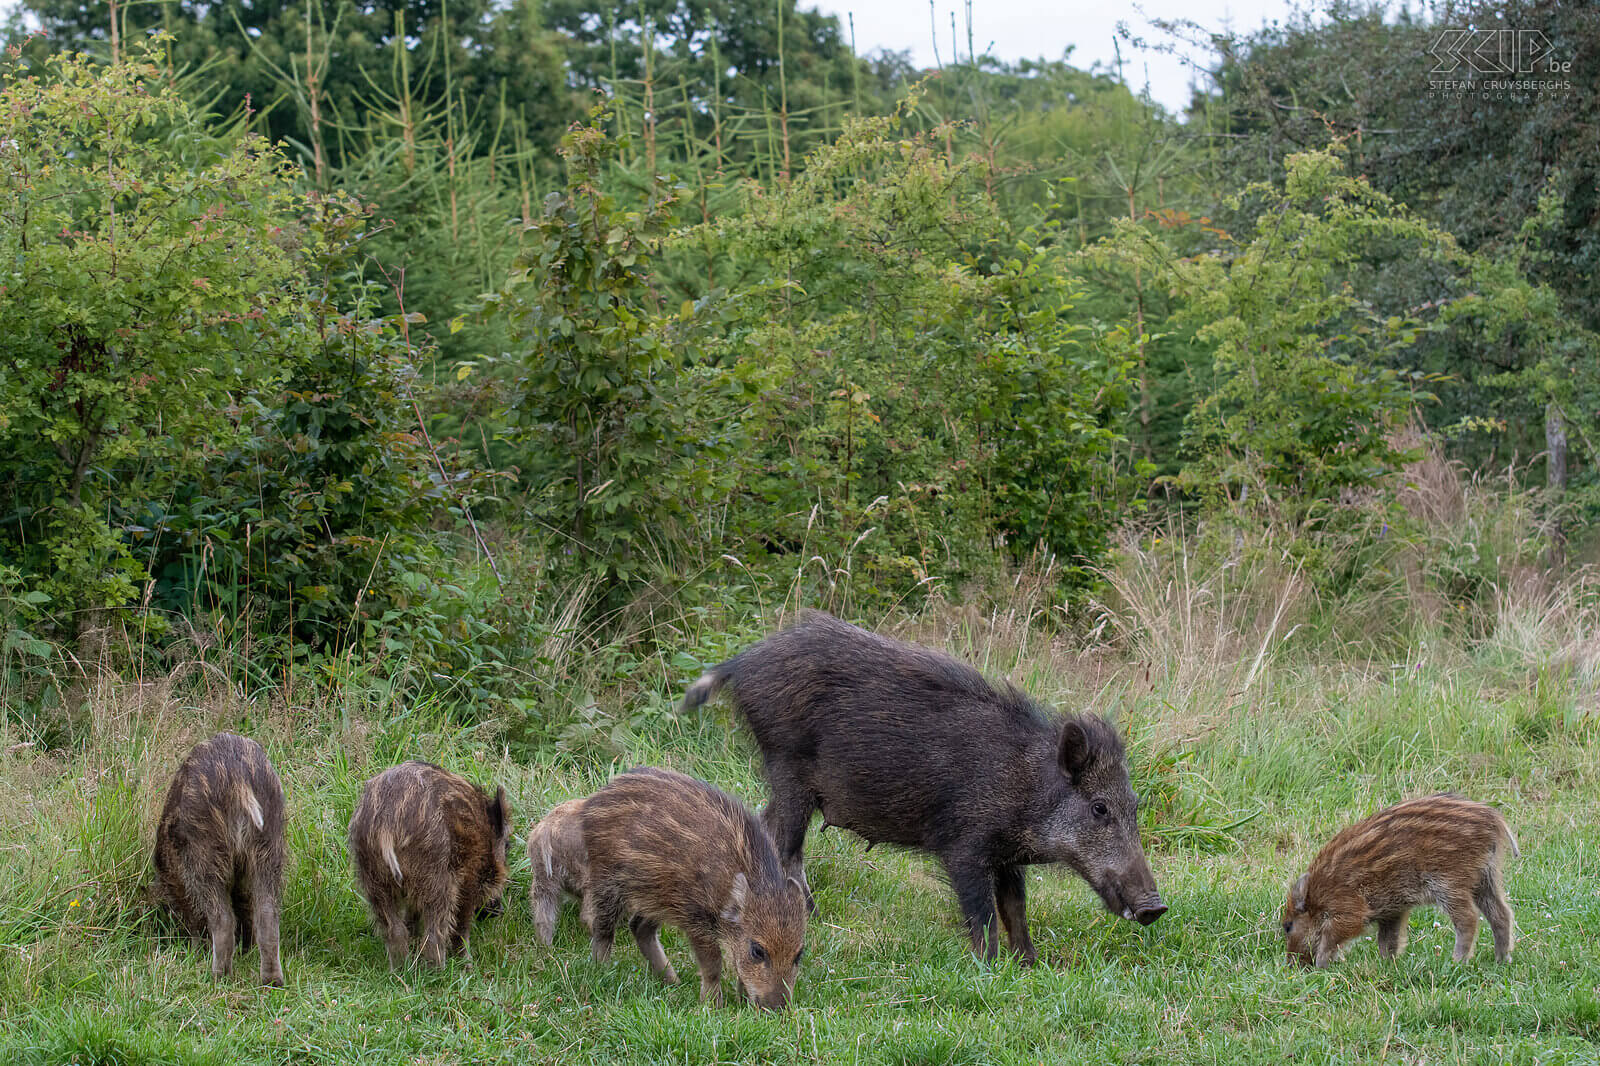 Wild boars Mother wild boar with squeakers, the youngest boars with their typical pajamas with lighter stripes. Stefan Cruysberghs